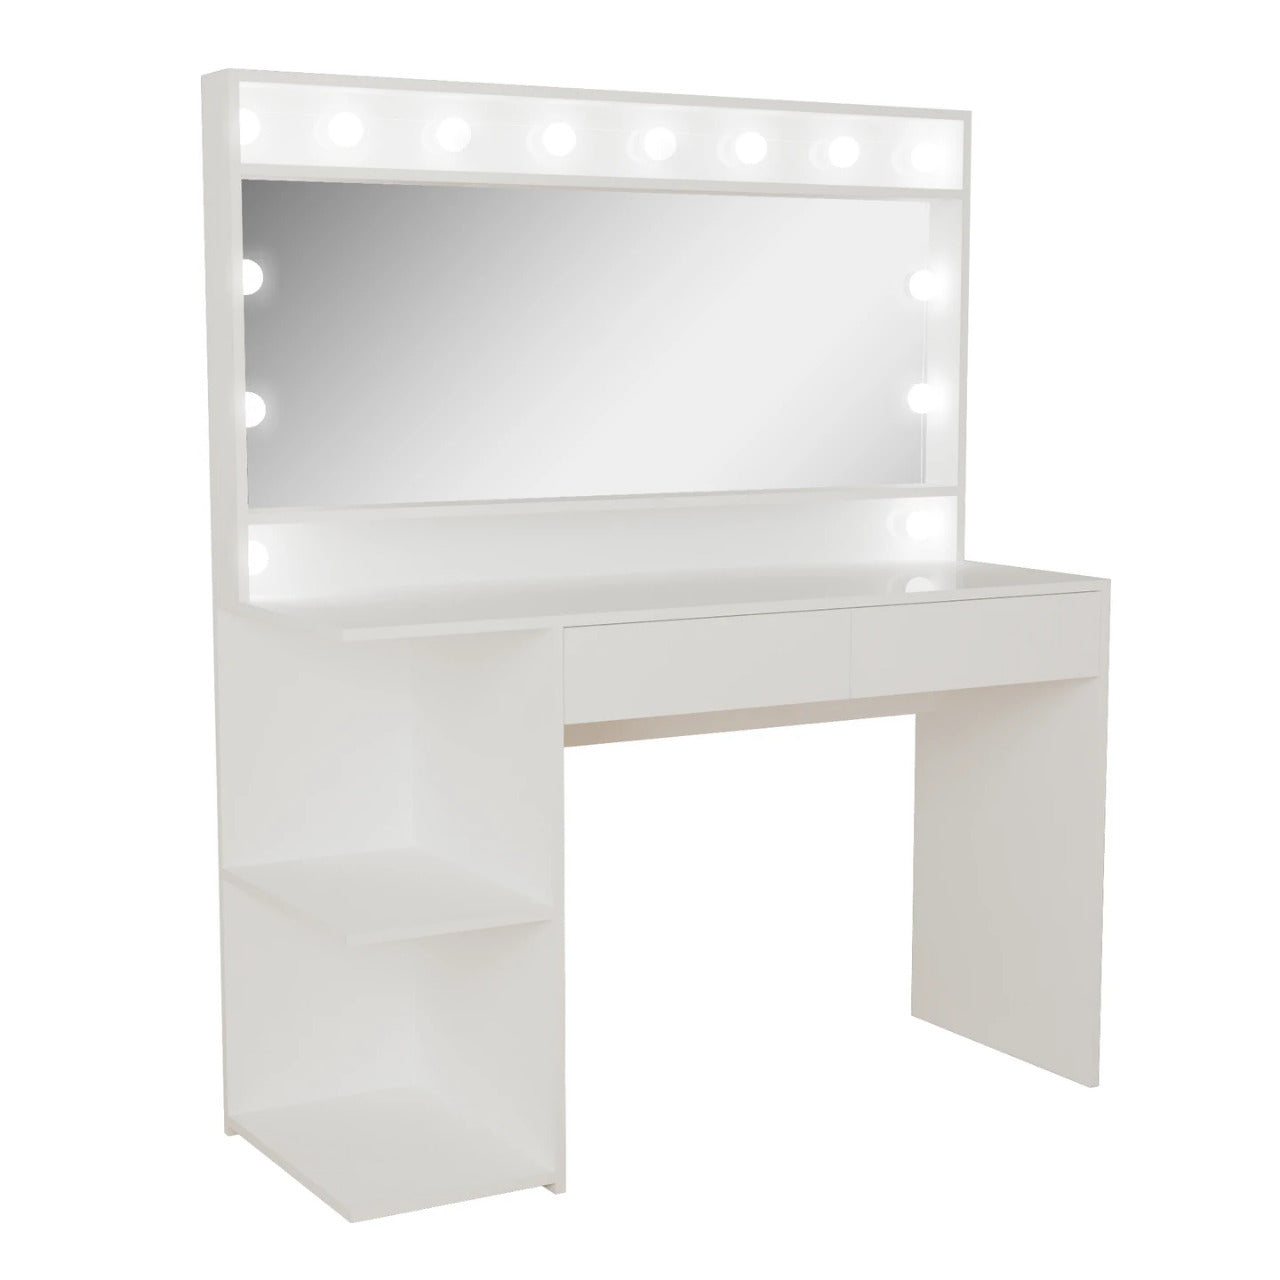 Makeup Vanity: Modern White Dressing Table with Light Bulbs